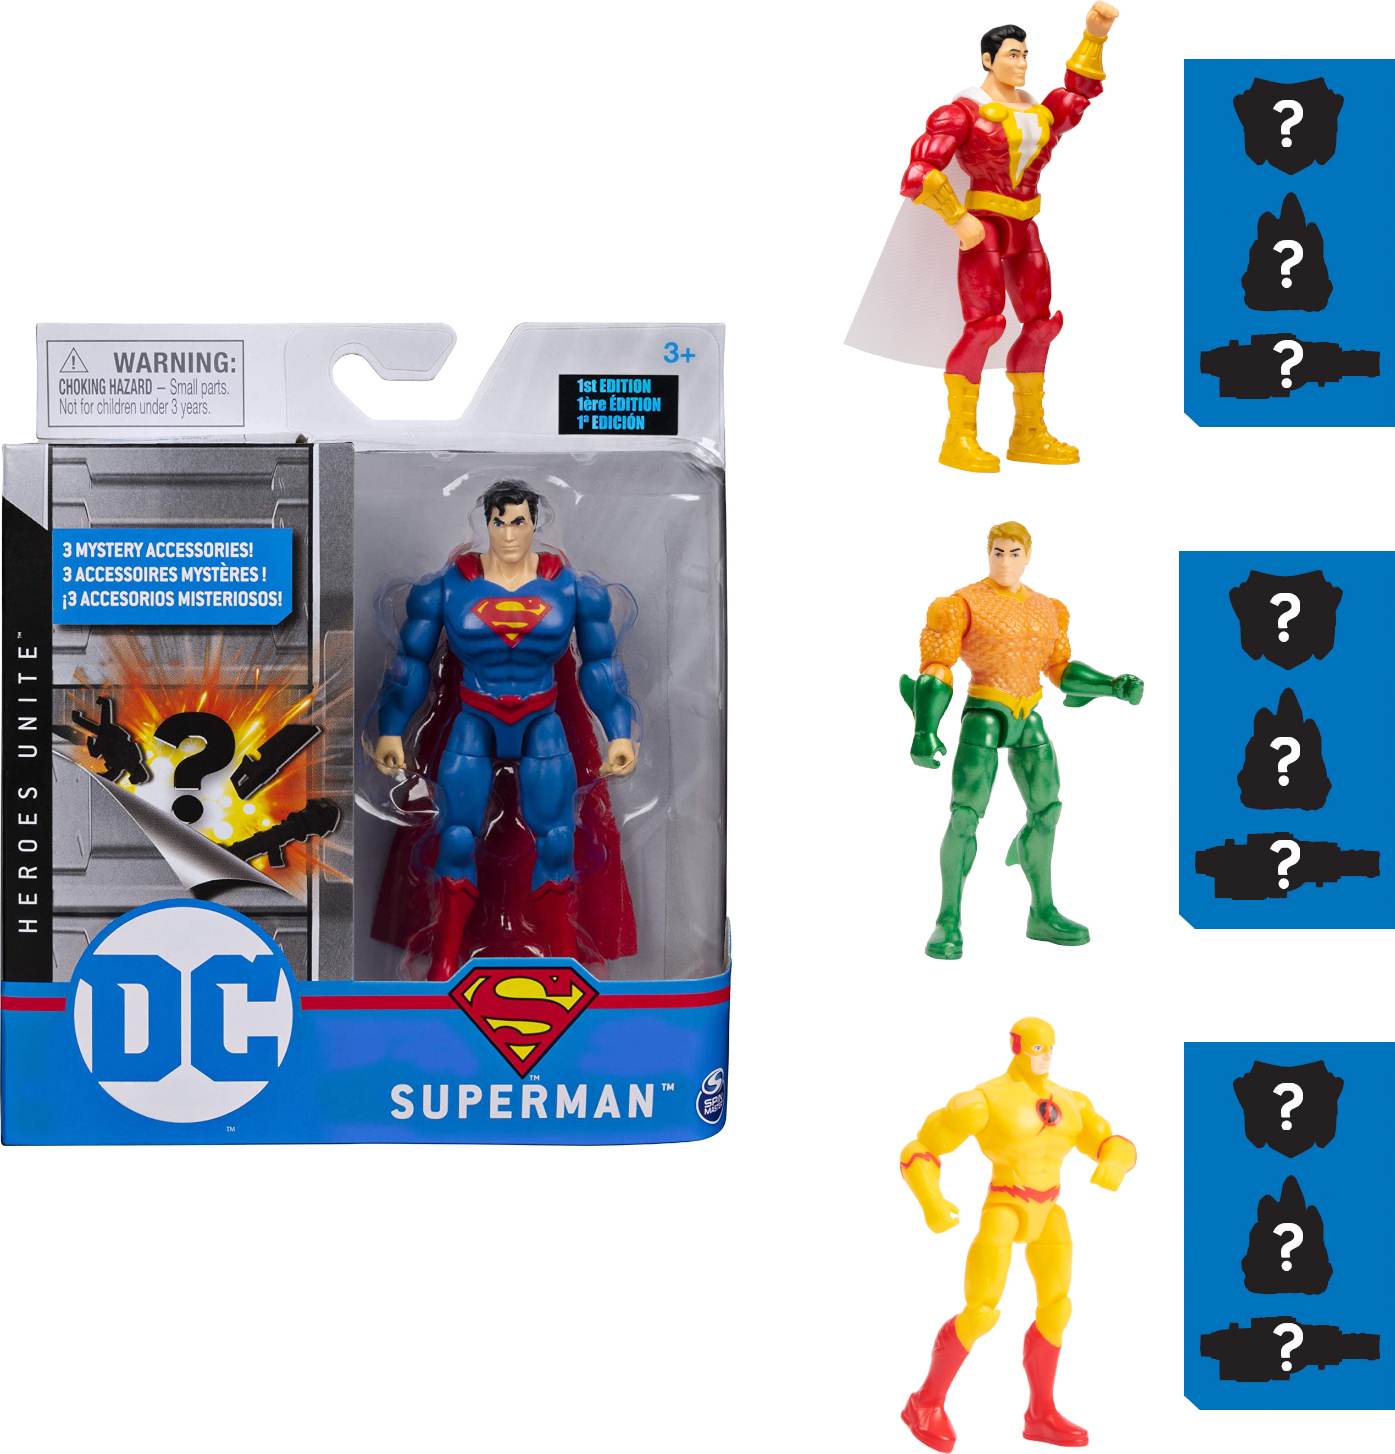 Minnaar wet knoflook DC Comics, 4-Inch SUPERMAN Action Figure with 3 Mystery Accessories,  Adventure 1 - Givens Books and Little Dickens